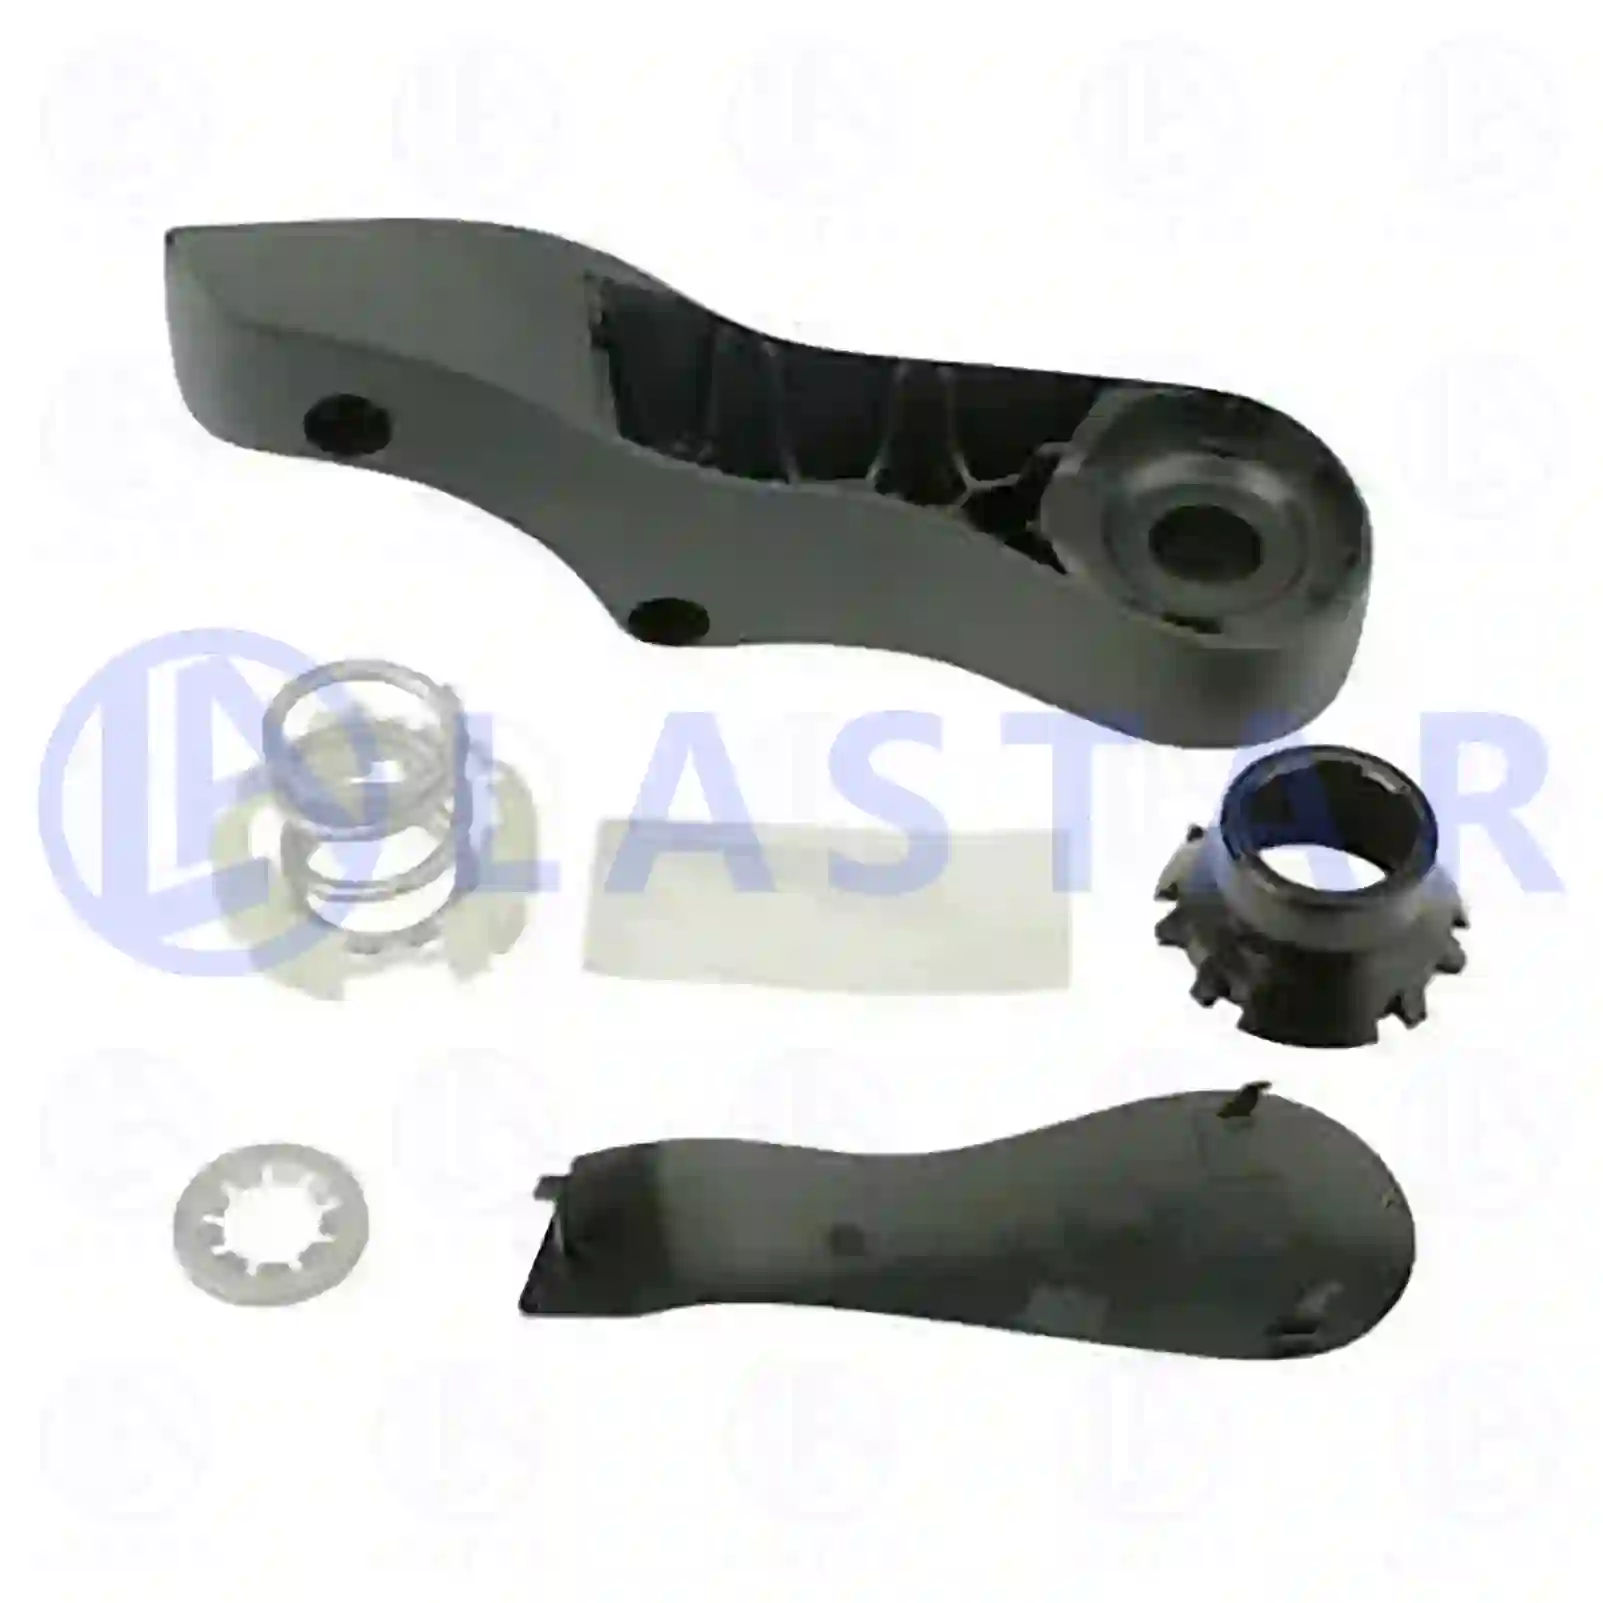  Repair kit, main mirror, right || Lastar Spare Part | Truck Spare Parts, Auotomotive Spare Parts